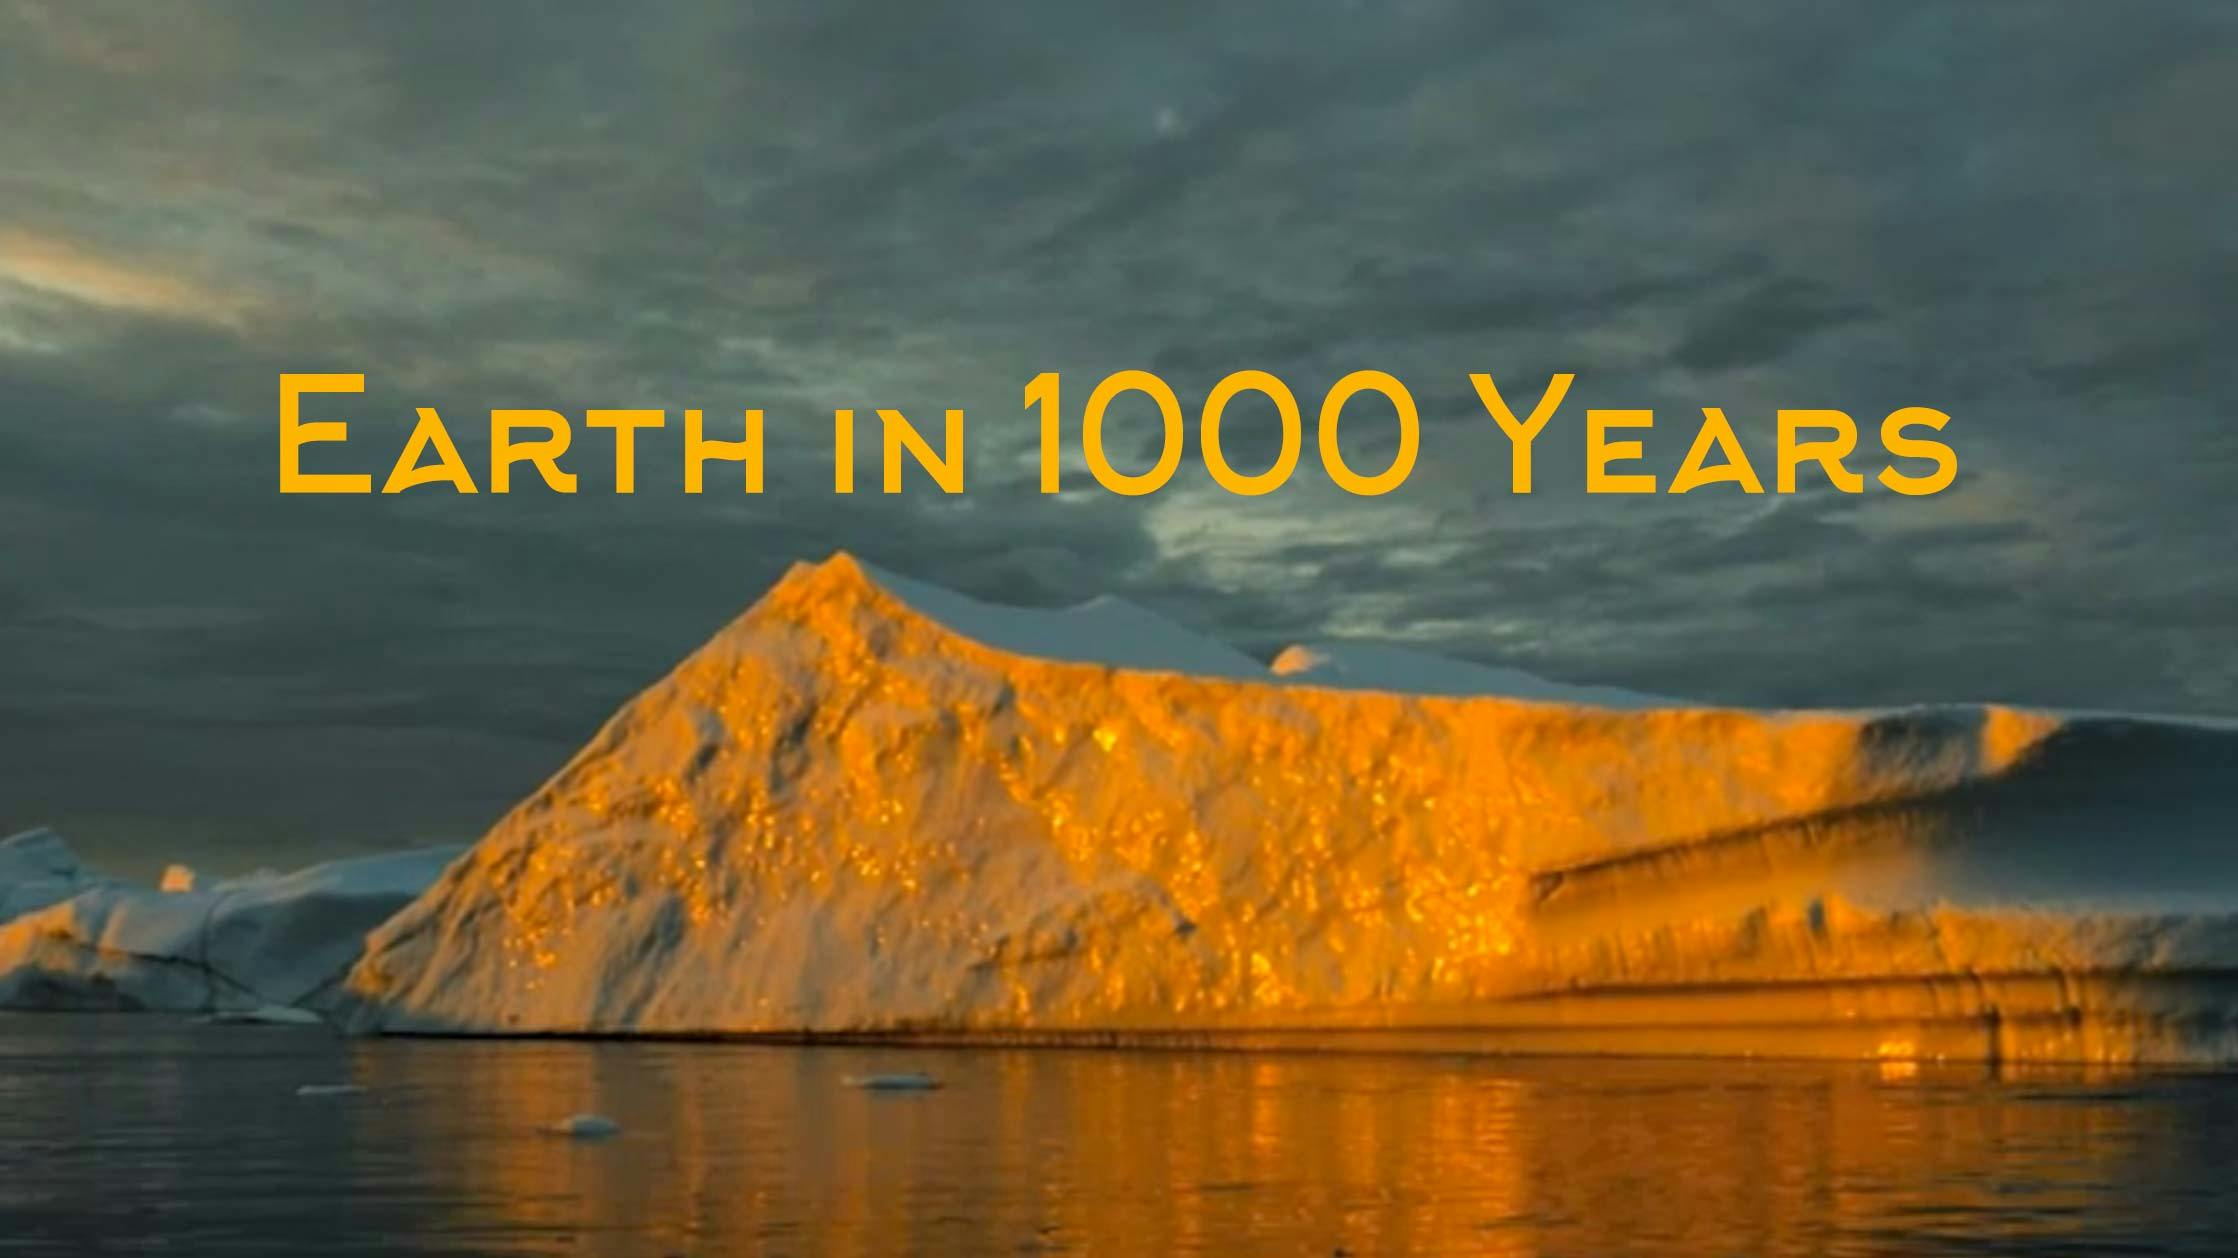 Earth in 1000 Years